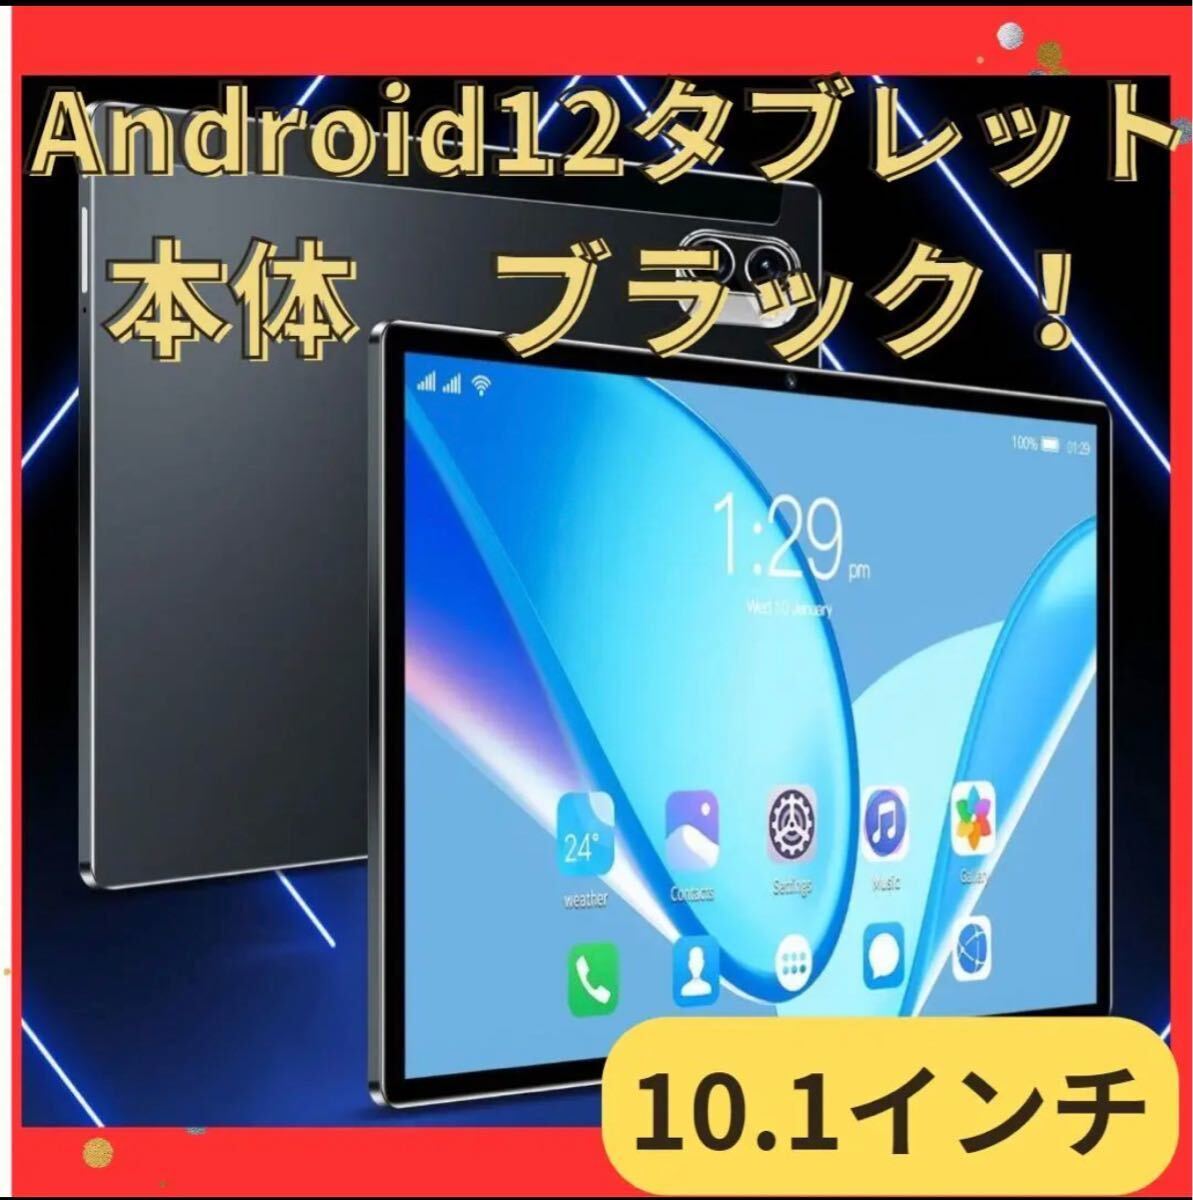 Android12 タブレット 10.1インチ Wi-Fiモデル 黒